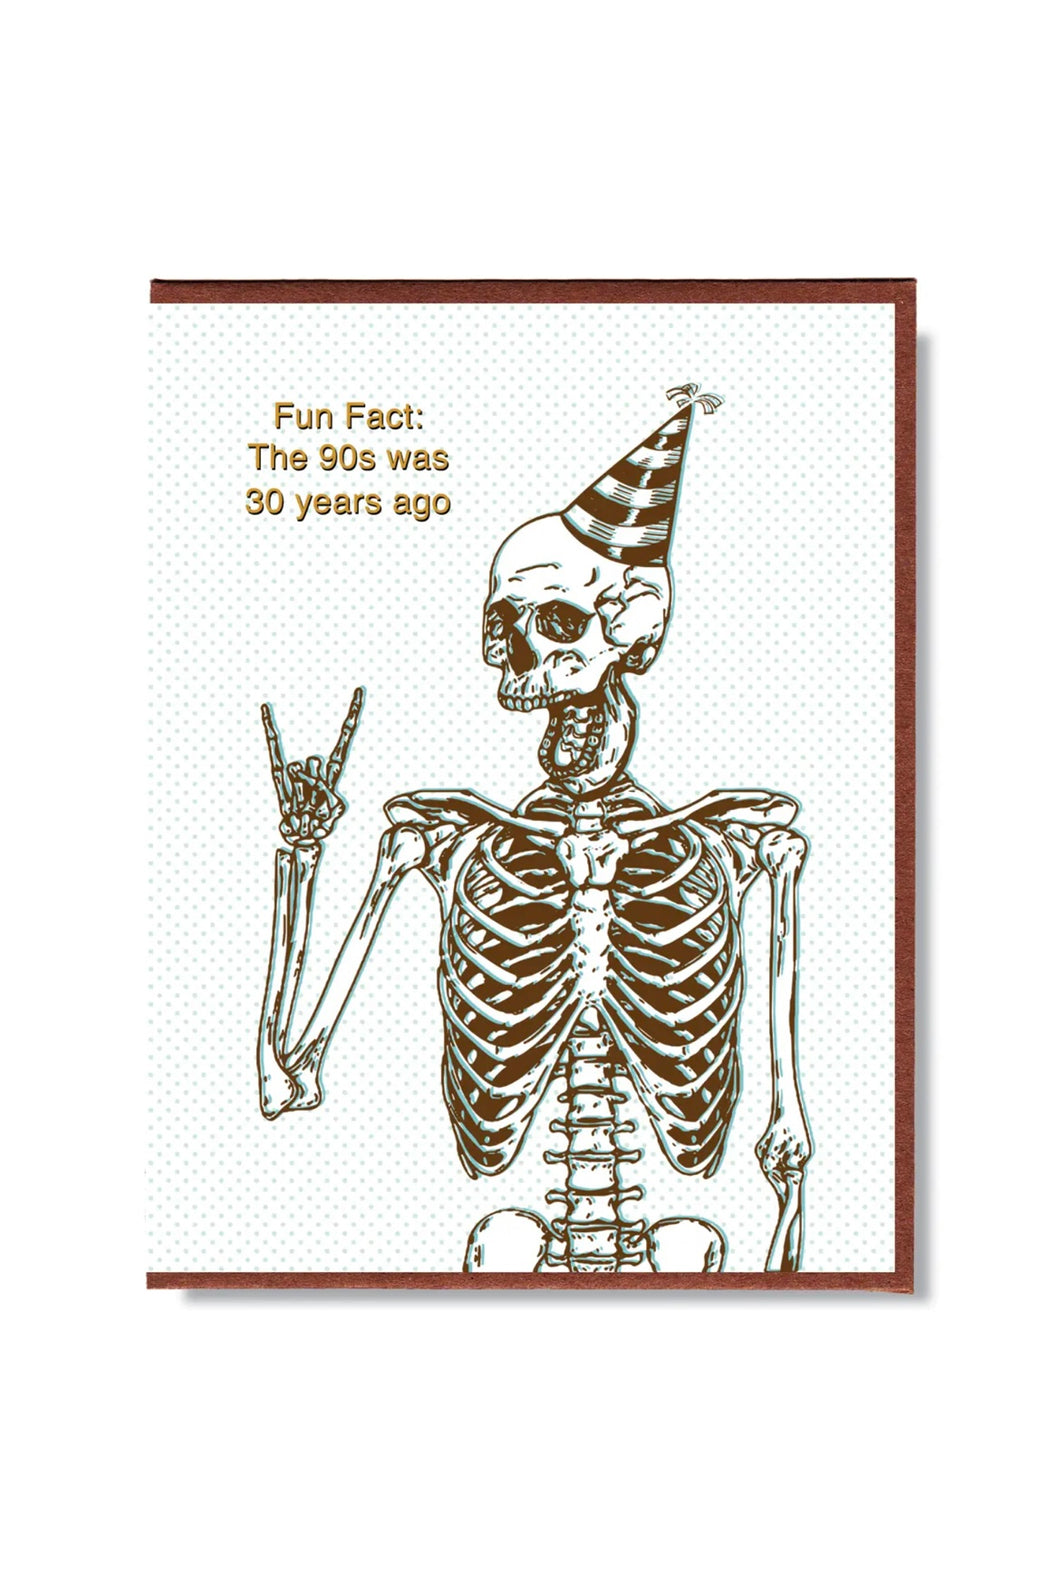 Skeleton in birthday hat 'The 90s was 30 years ago' card